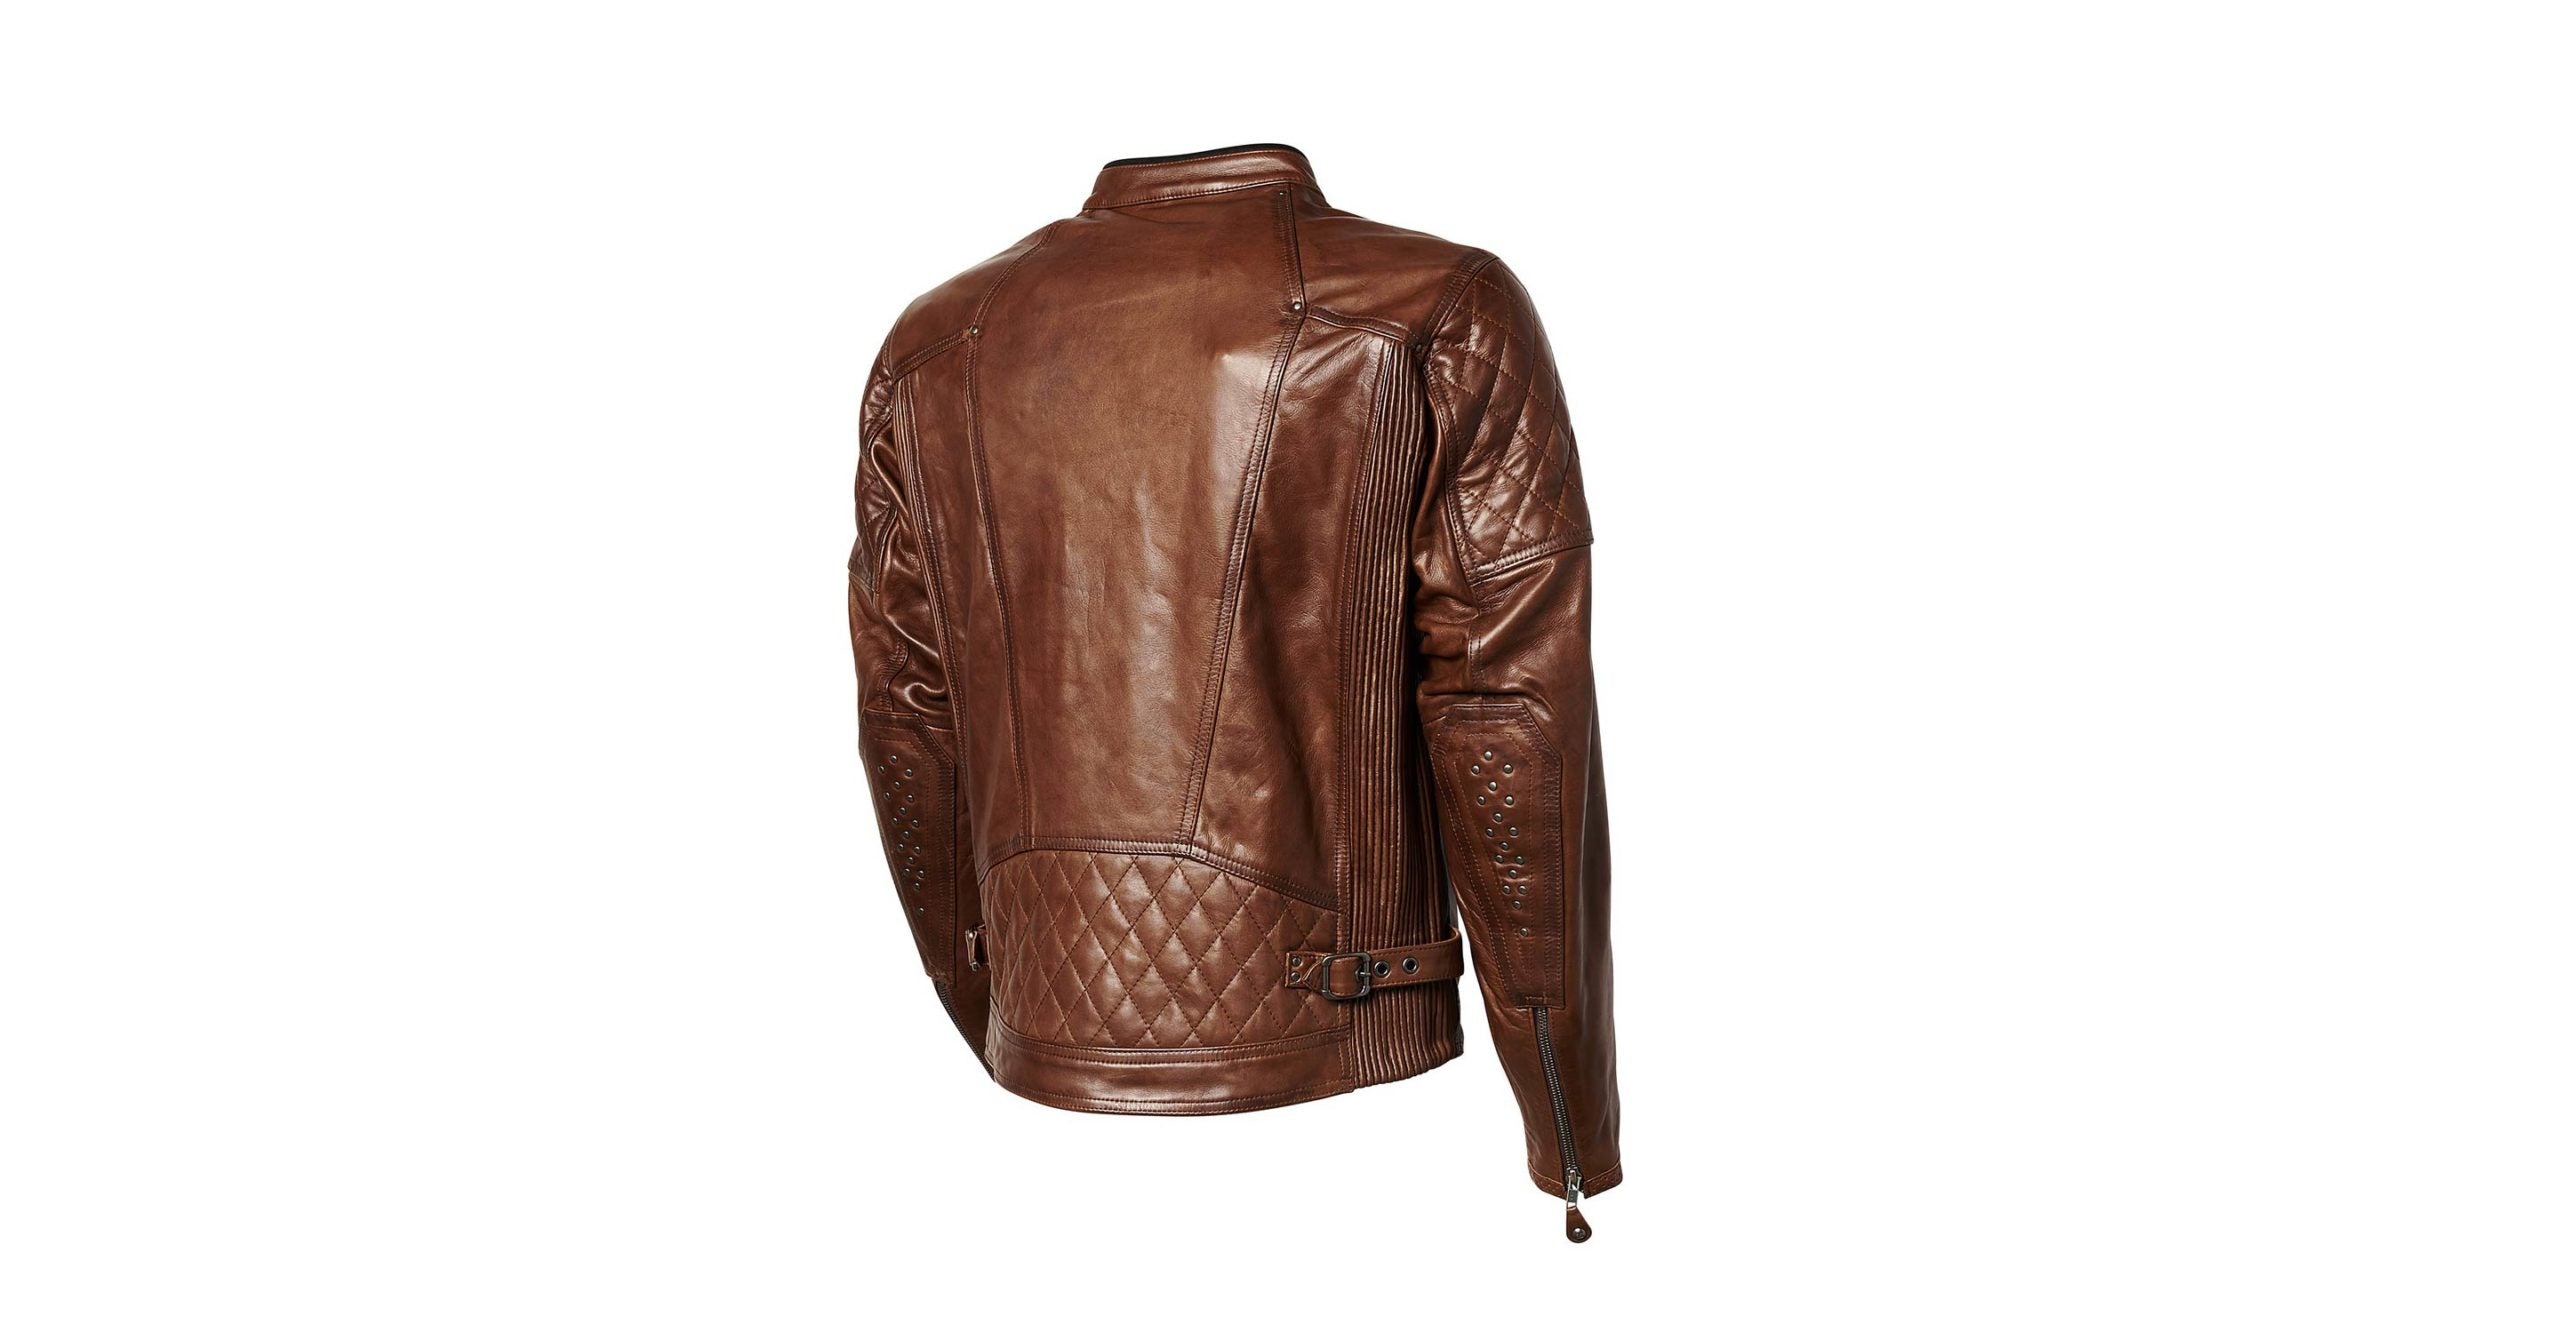 New Motorcycle Real Cow Leather Jacket for Moto Biker